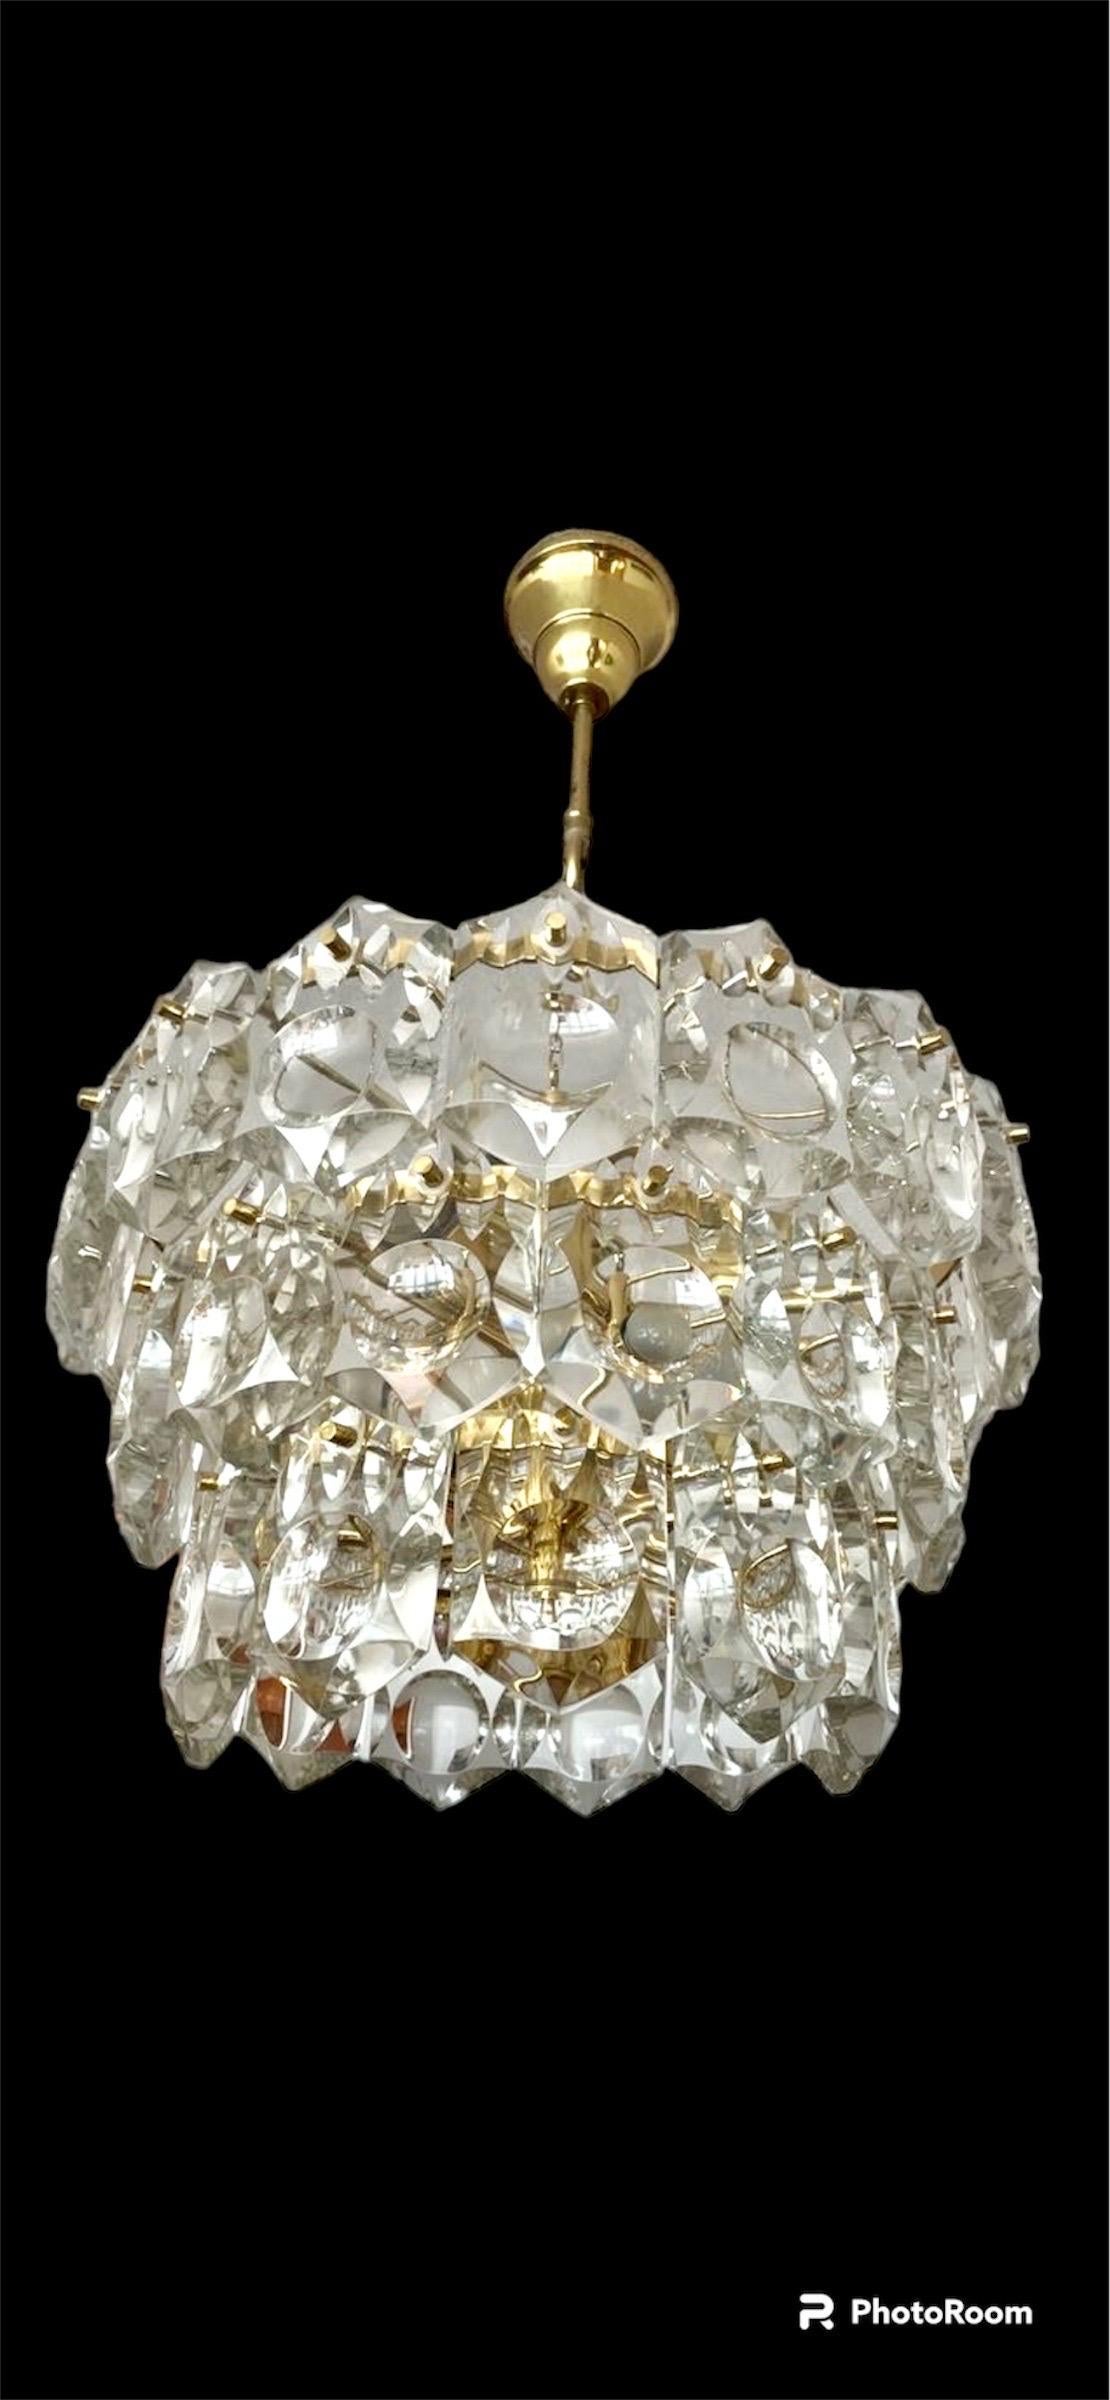 Exceptional Kinkeldey chandelier with large glass. The Design and the quality of the glass make this piece the best of the Austria Design.

This unique Kindeldey glass chandelier in ice frost glass murano are exceptional.

This Pieces of Arts glass